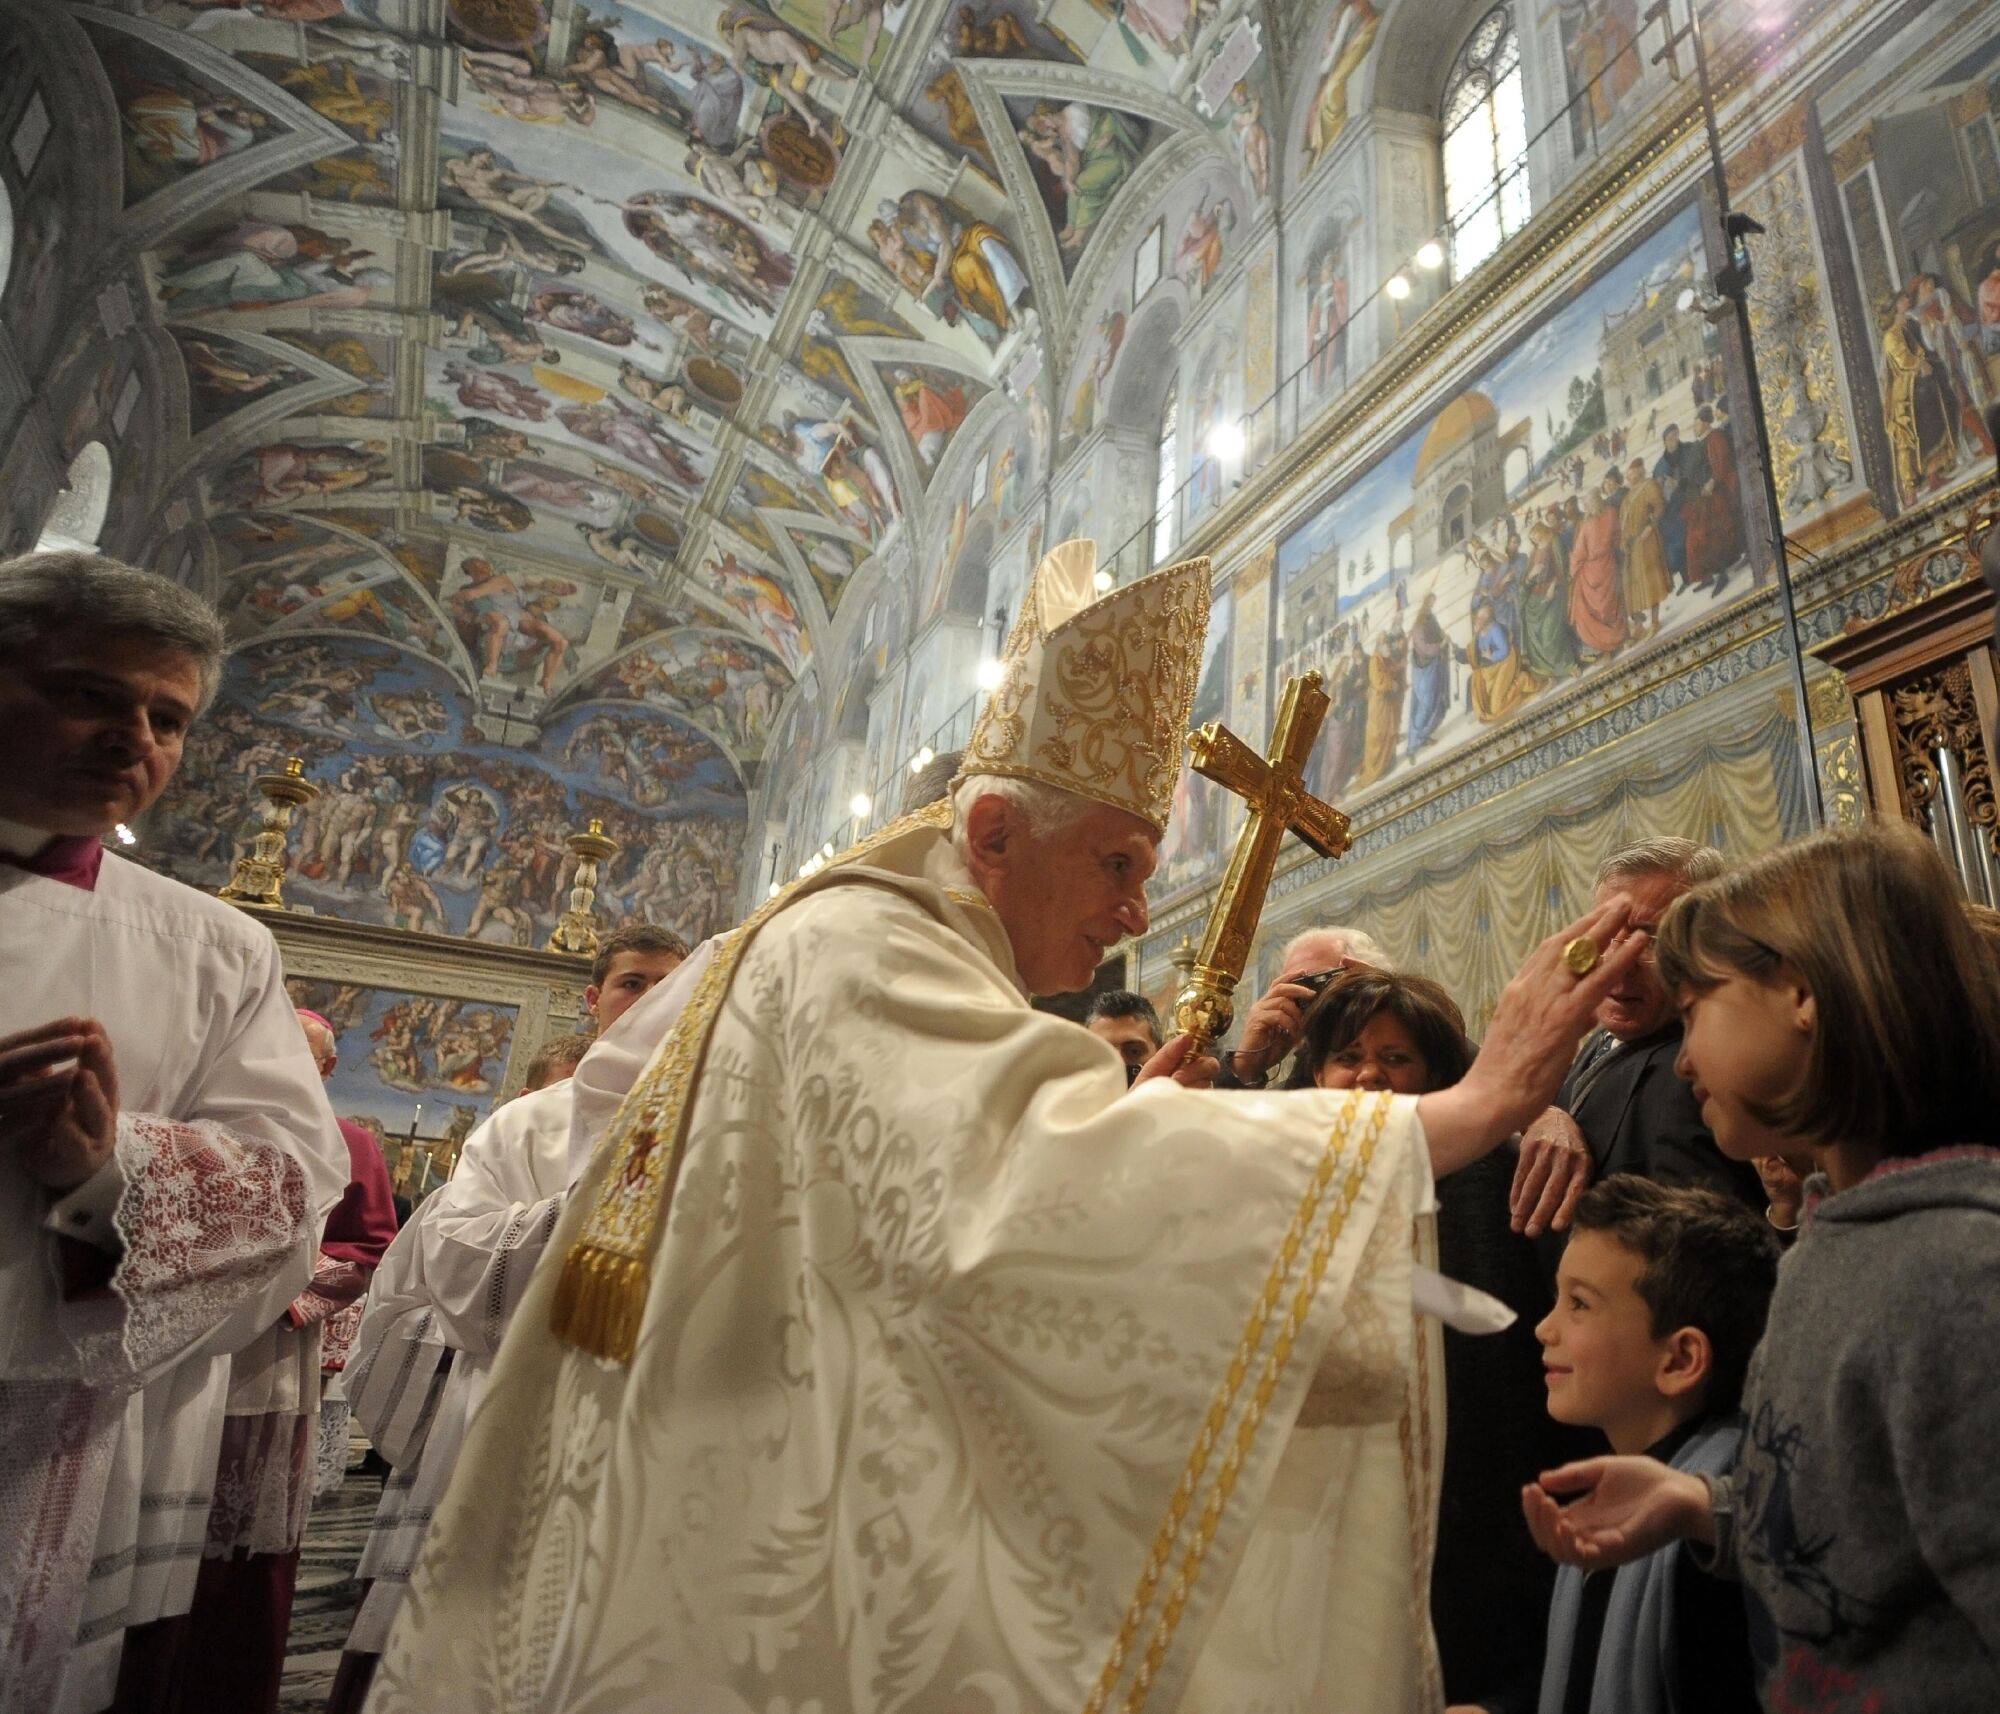 Pope Benedict XVI  in cream-colored robes shakes hands with children in the Sistine Chapel.